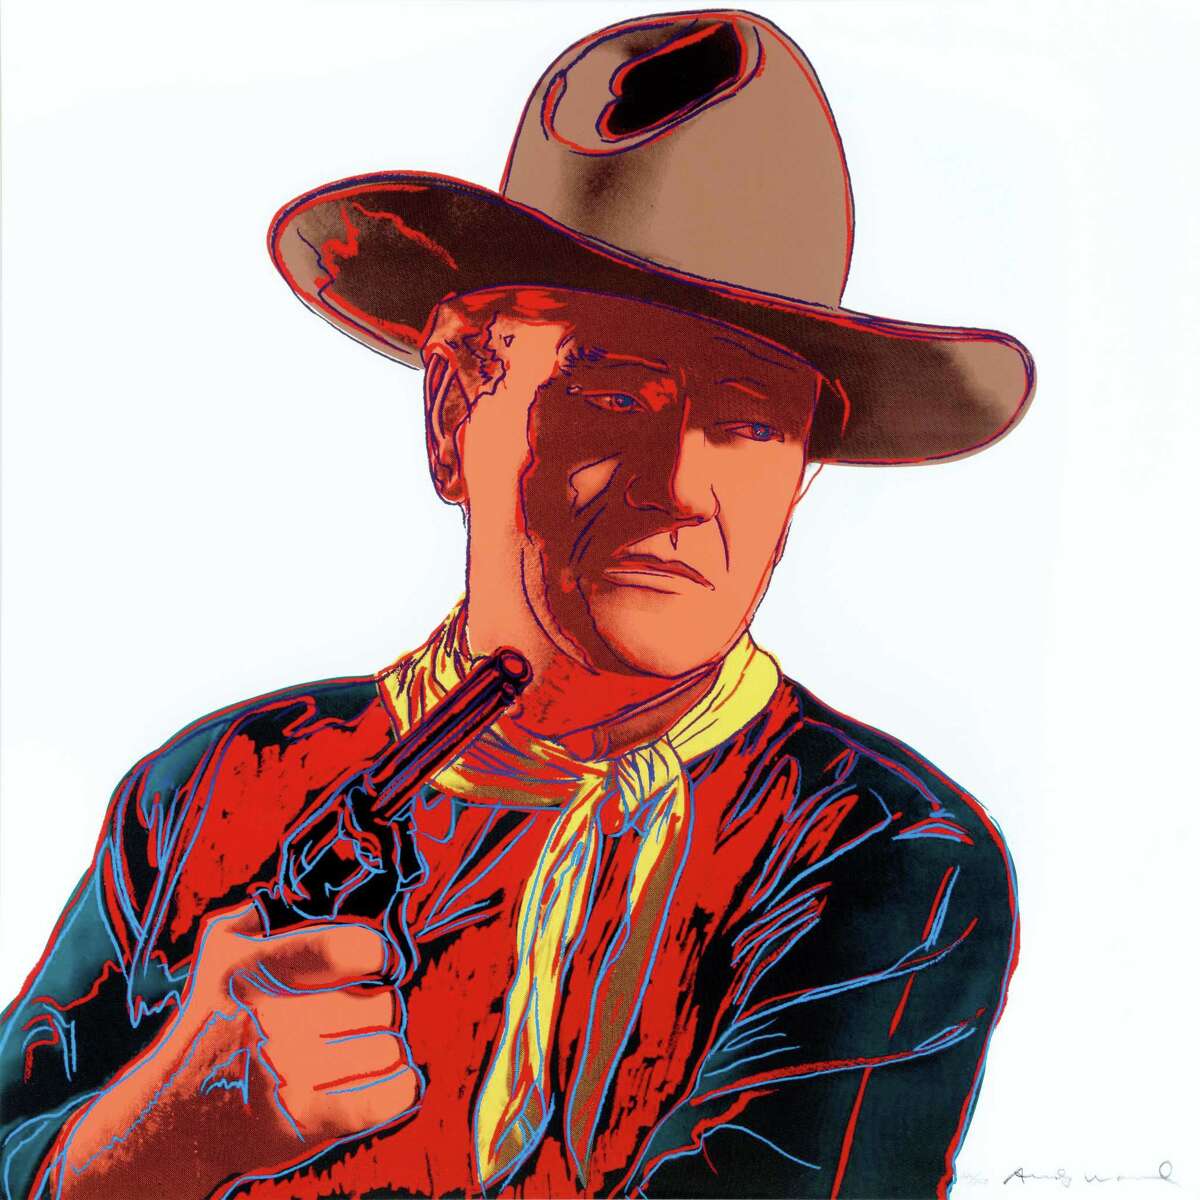 Andy Warhol's screenprint "John Wayne," from his 10-image "Cowboys and Indians" series, is on display at the Briscoe Western Art Museum.